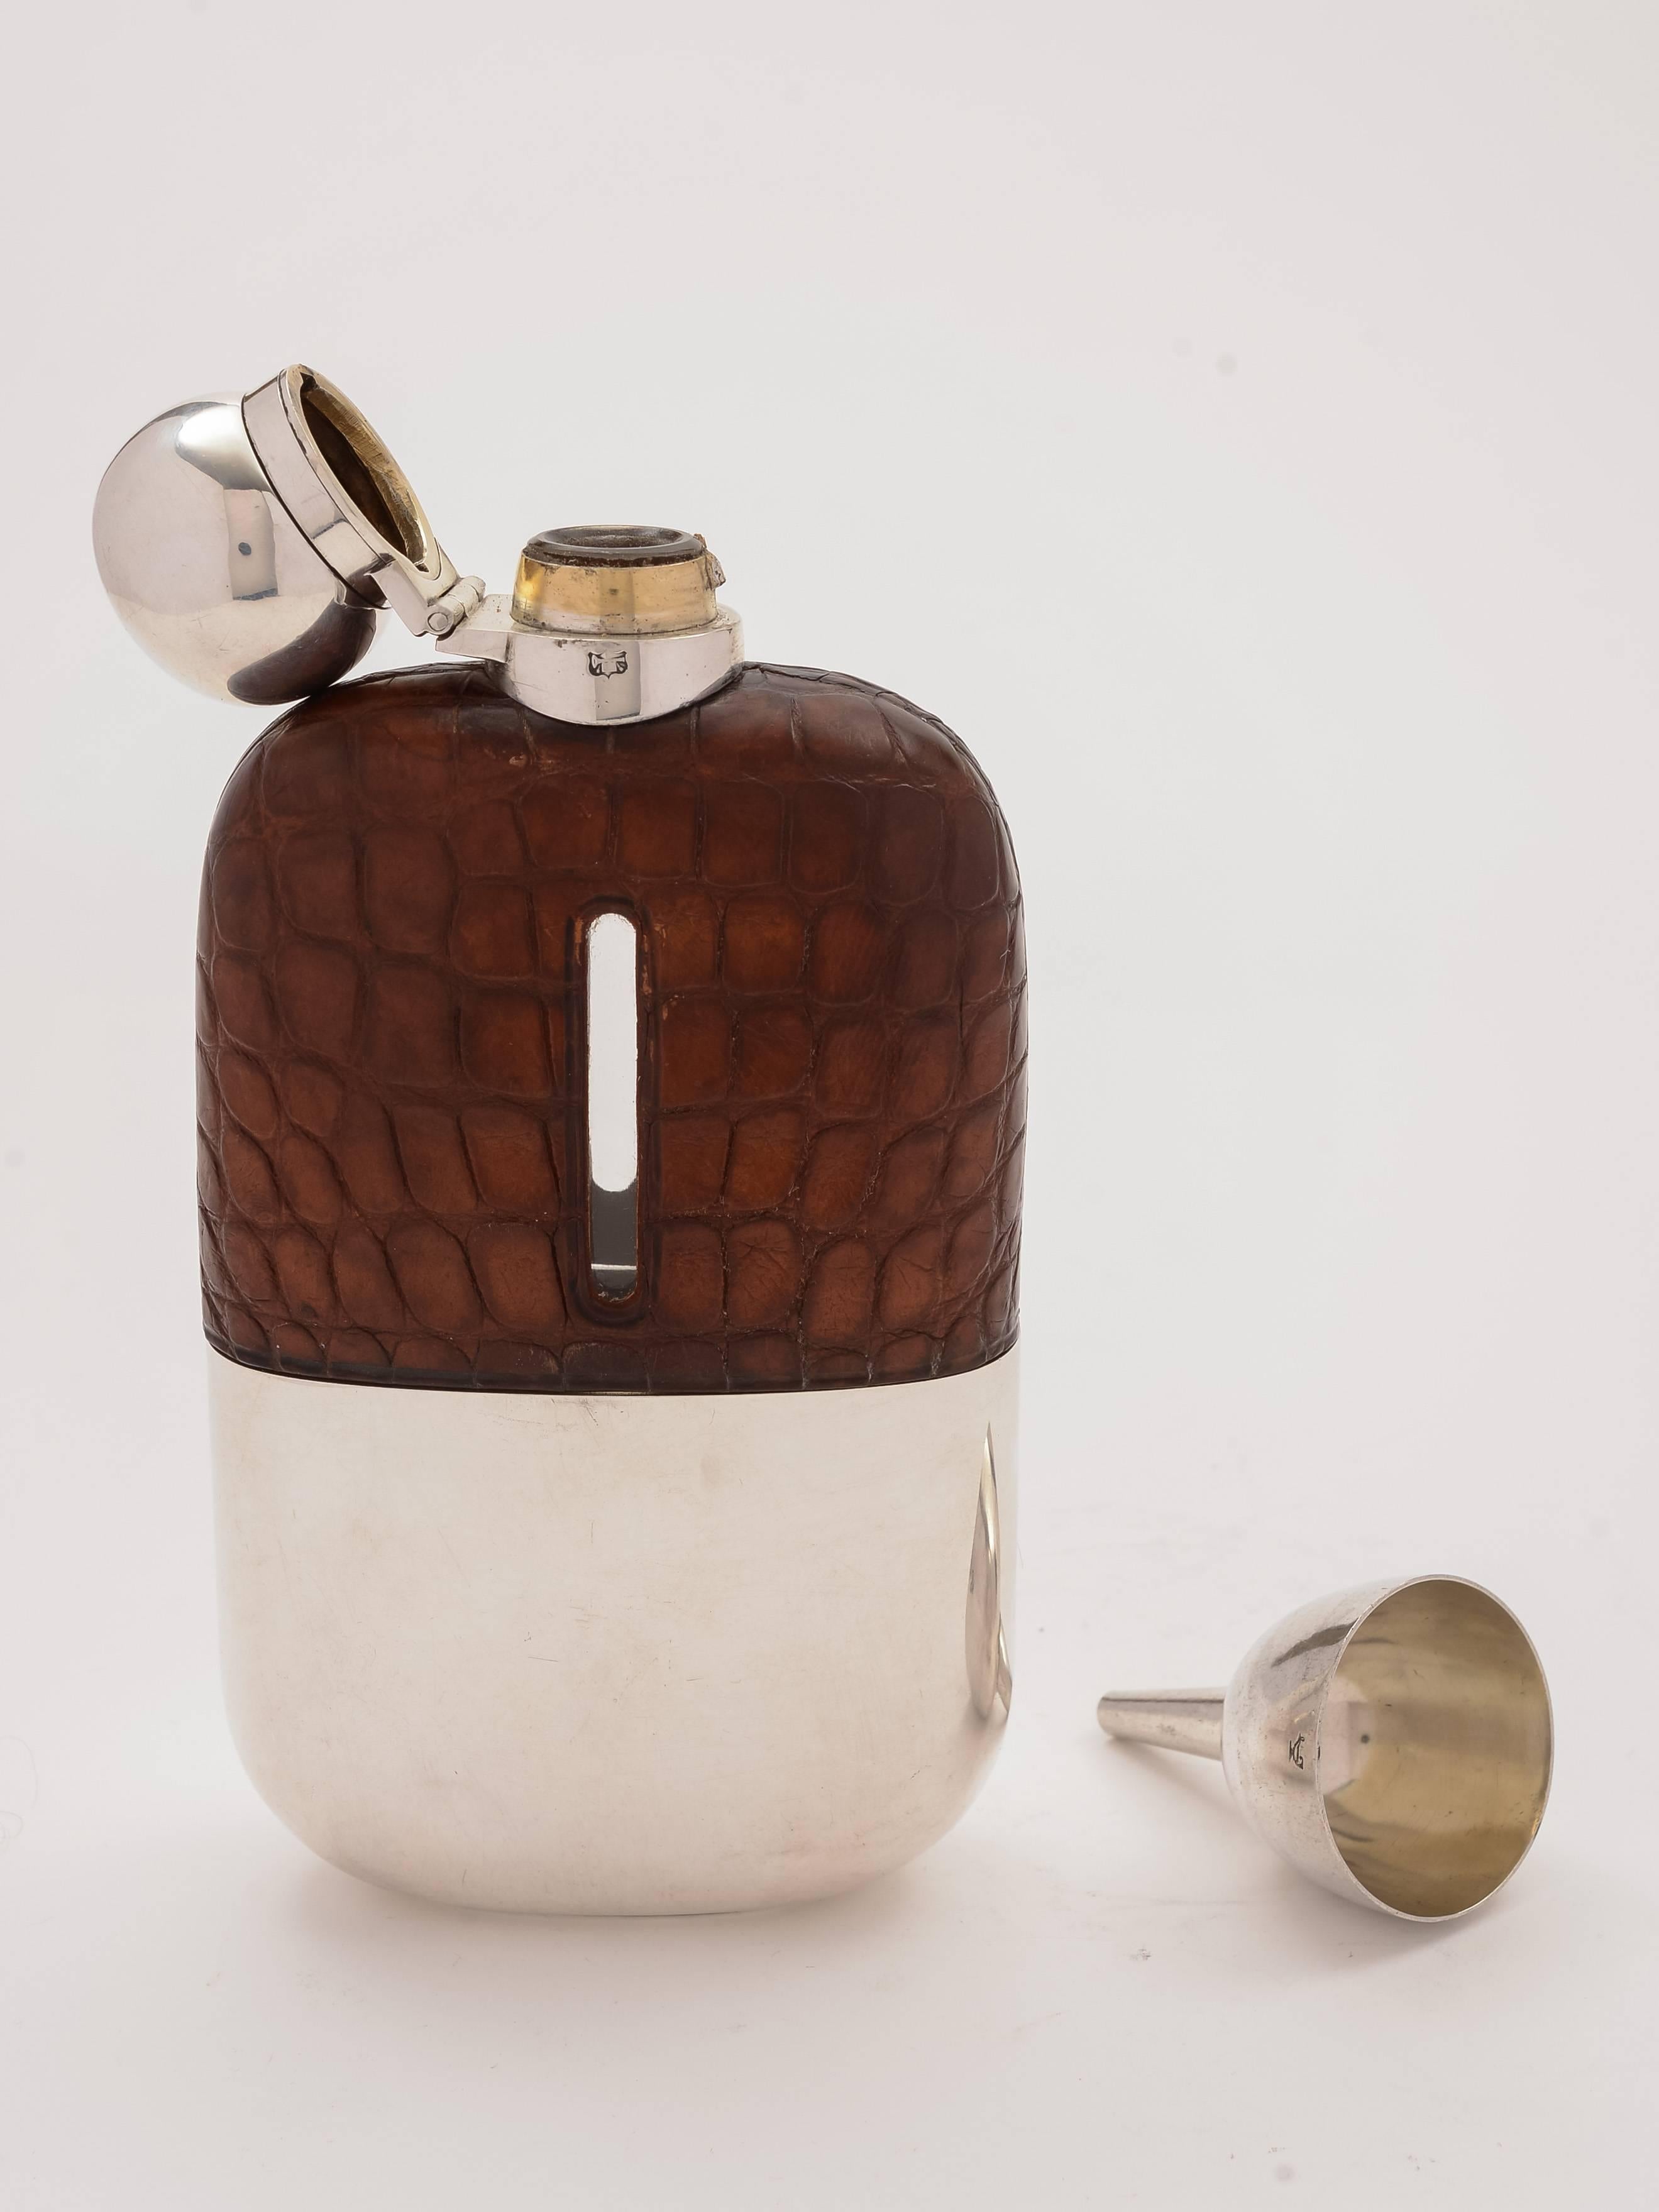 A nice English Edwardian silver plated hip flask with crocodile leather cover, bayonet top and pull-off cup with original gilded interior. Also comes with silver plated filling funnel, circa 1905. Made by the renowned maker James Dixon &